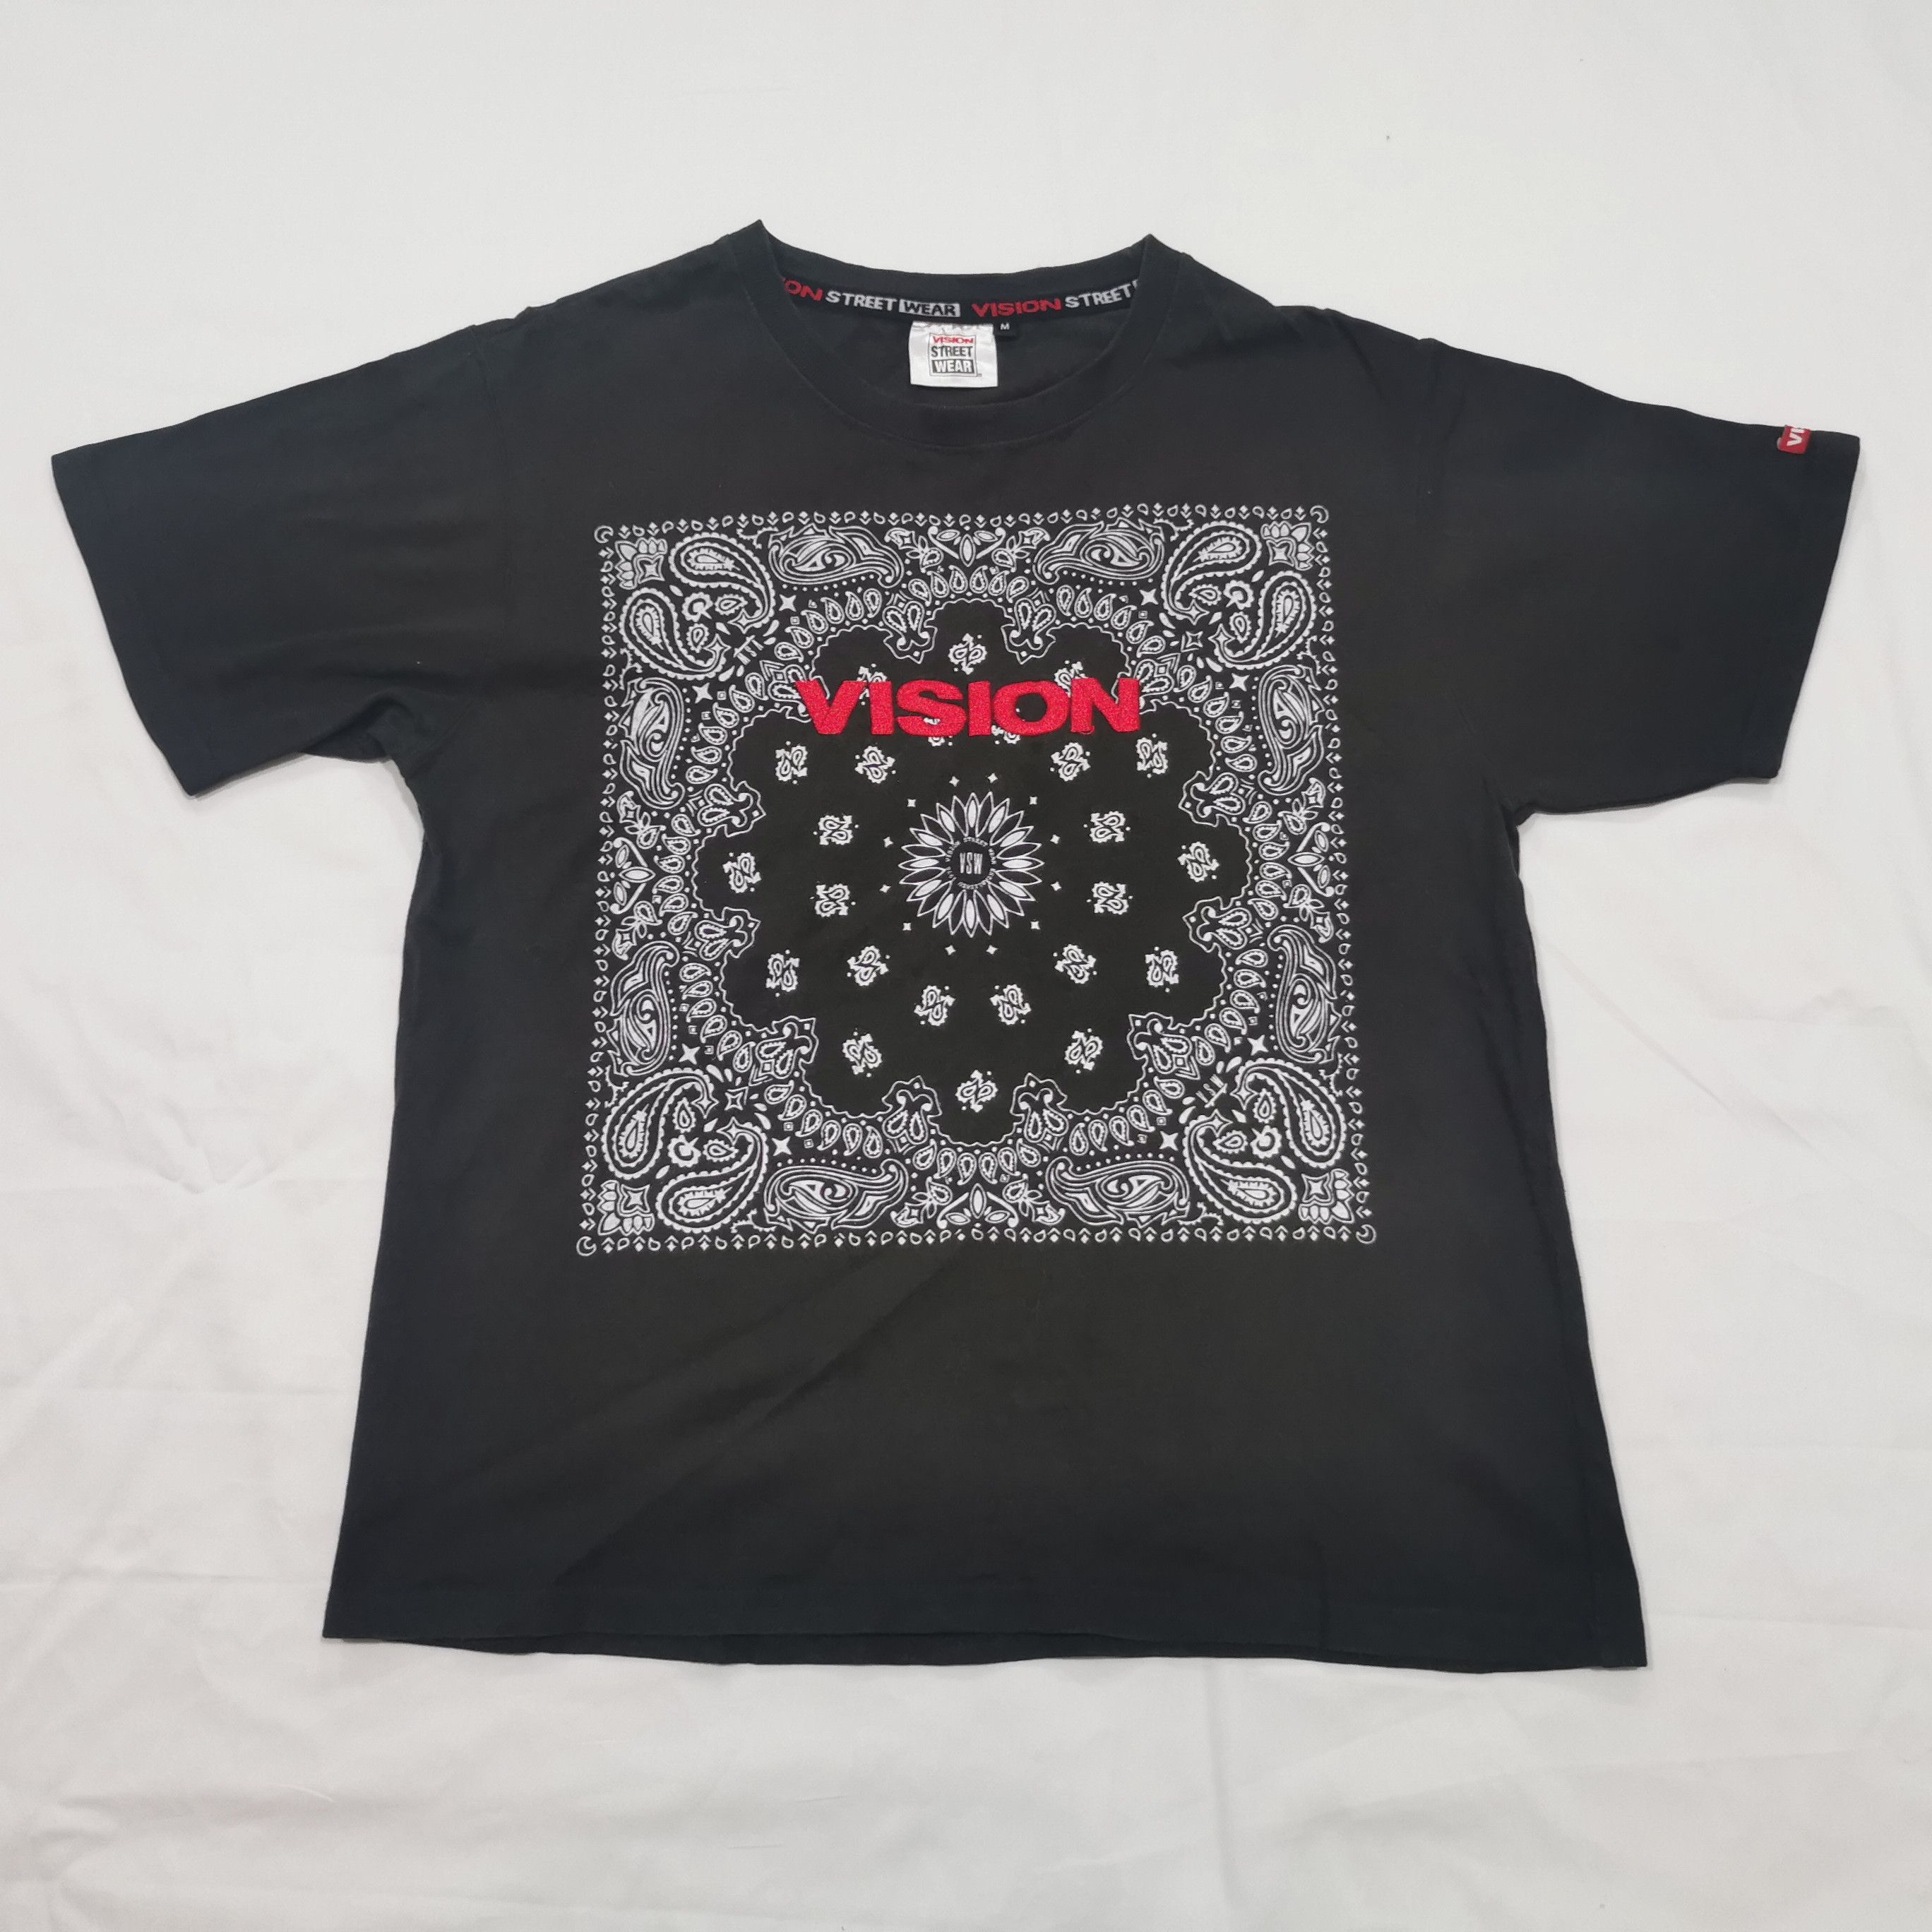 Vintage - Vision Street Wear Embroidery Spell Out Tshirt - 1